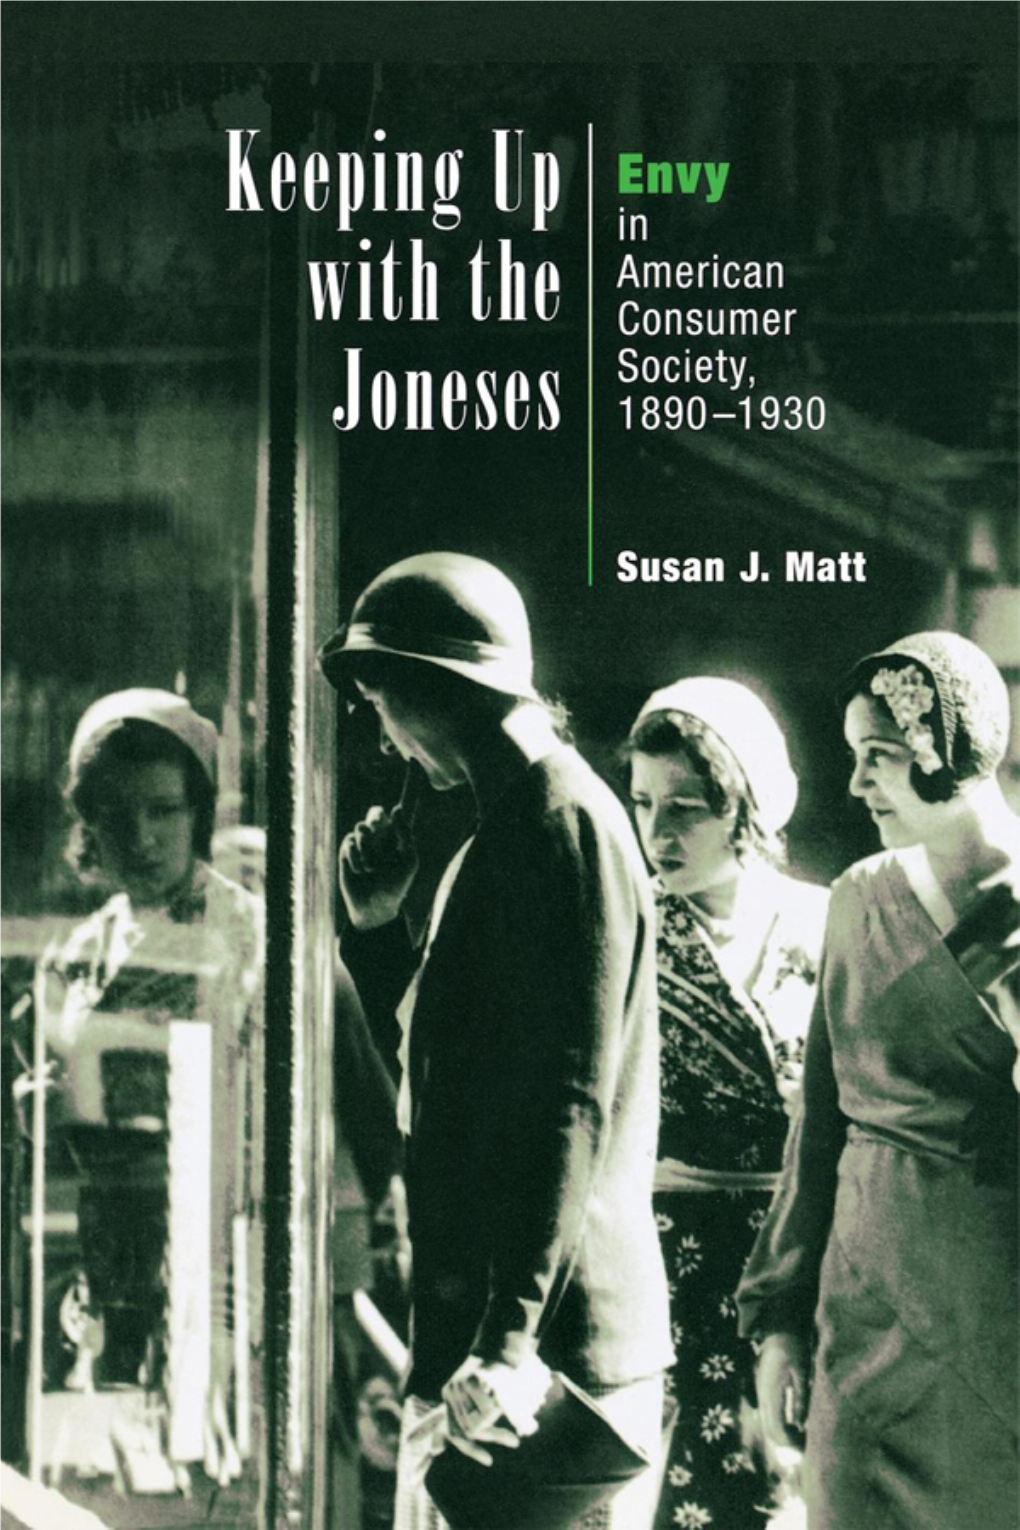 Keeping up with the Joneses: Envy in American Consumer Society